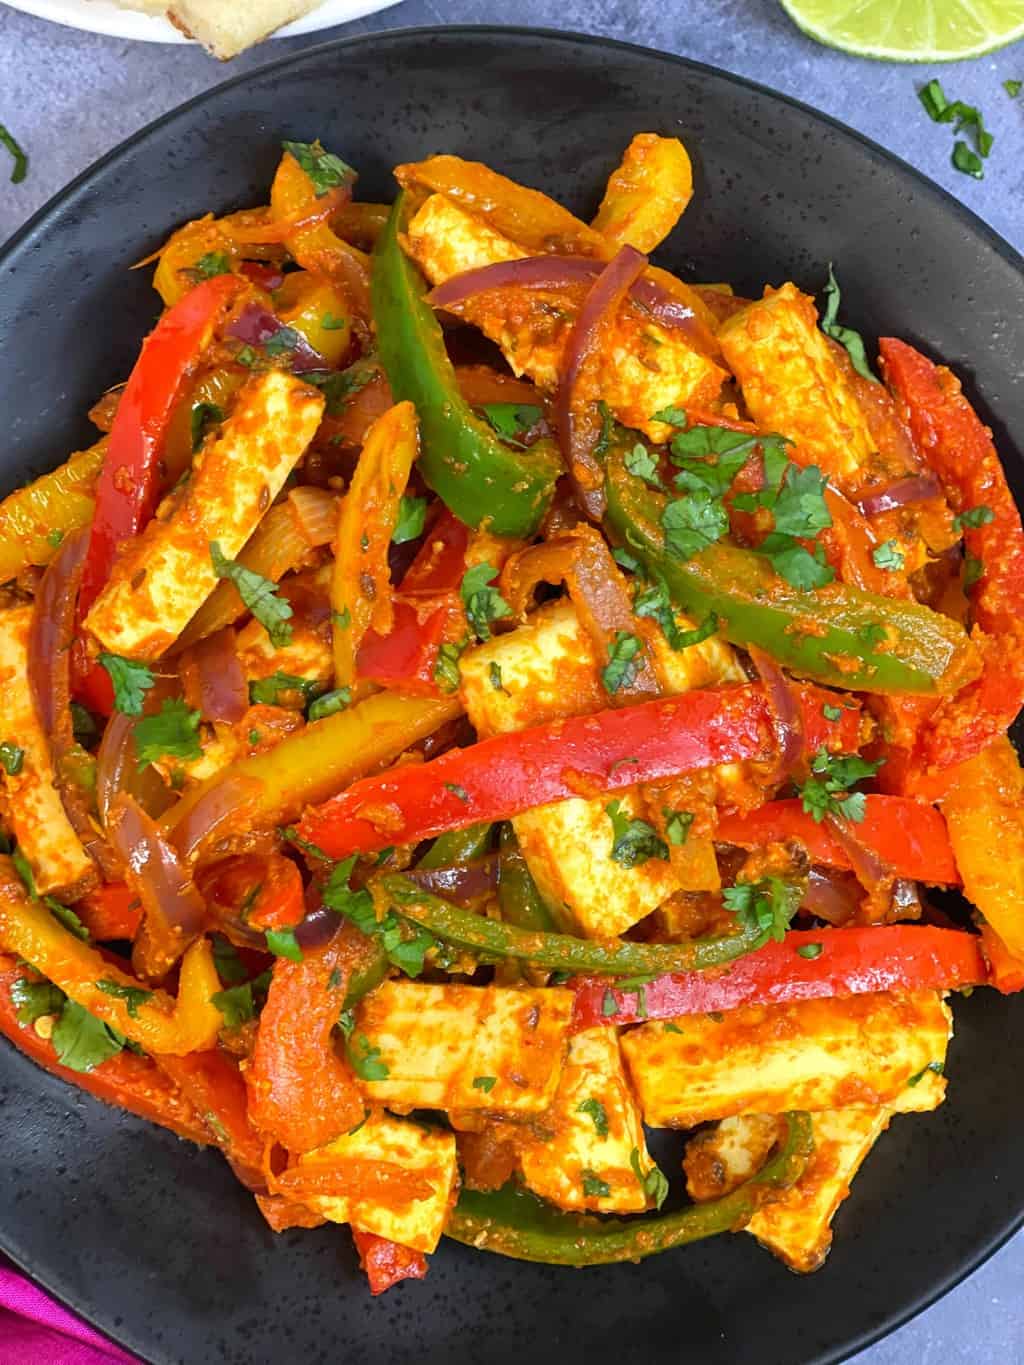 paneer stir fry with bell peppers served in a plate garnished with coriander leaves